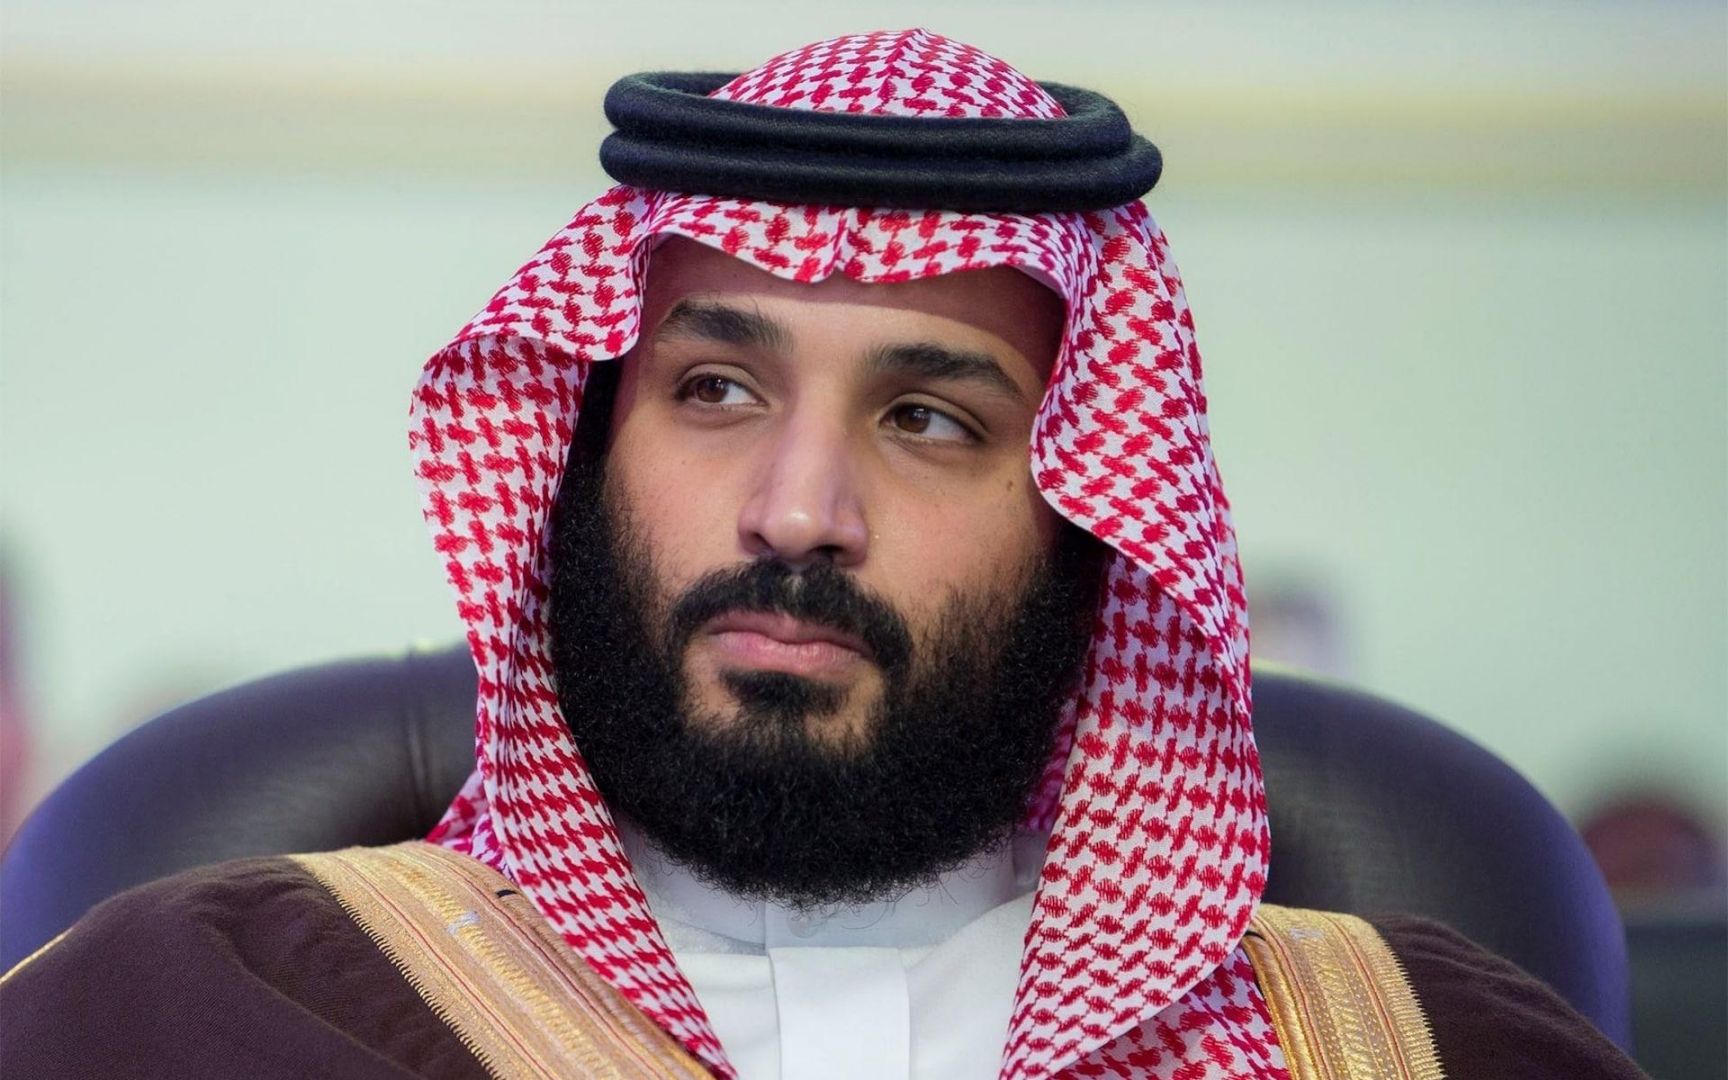 Saudi crown prince says unrealistic energy policies will lead to higher inflation